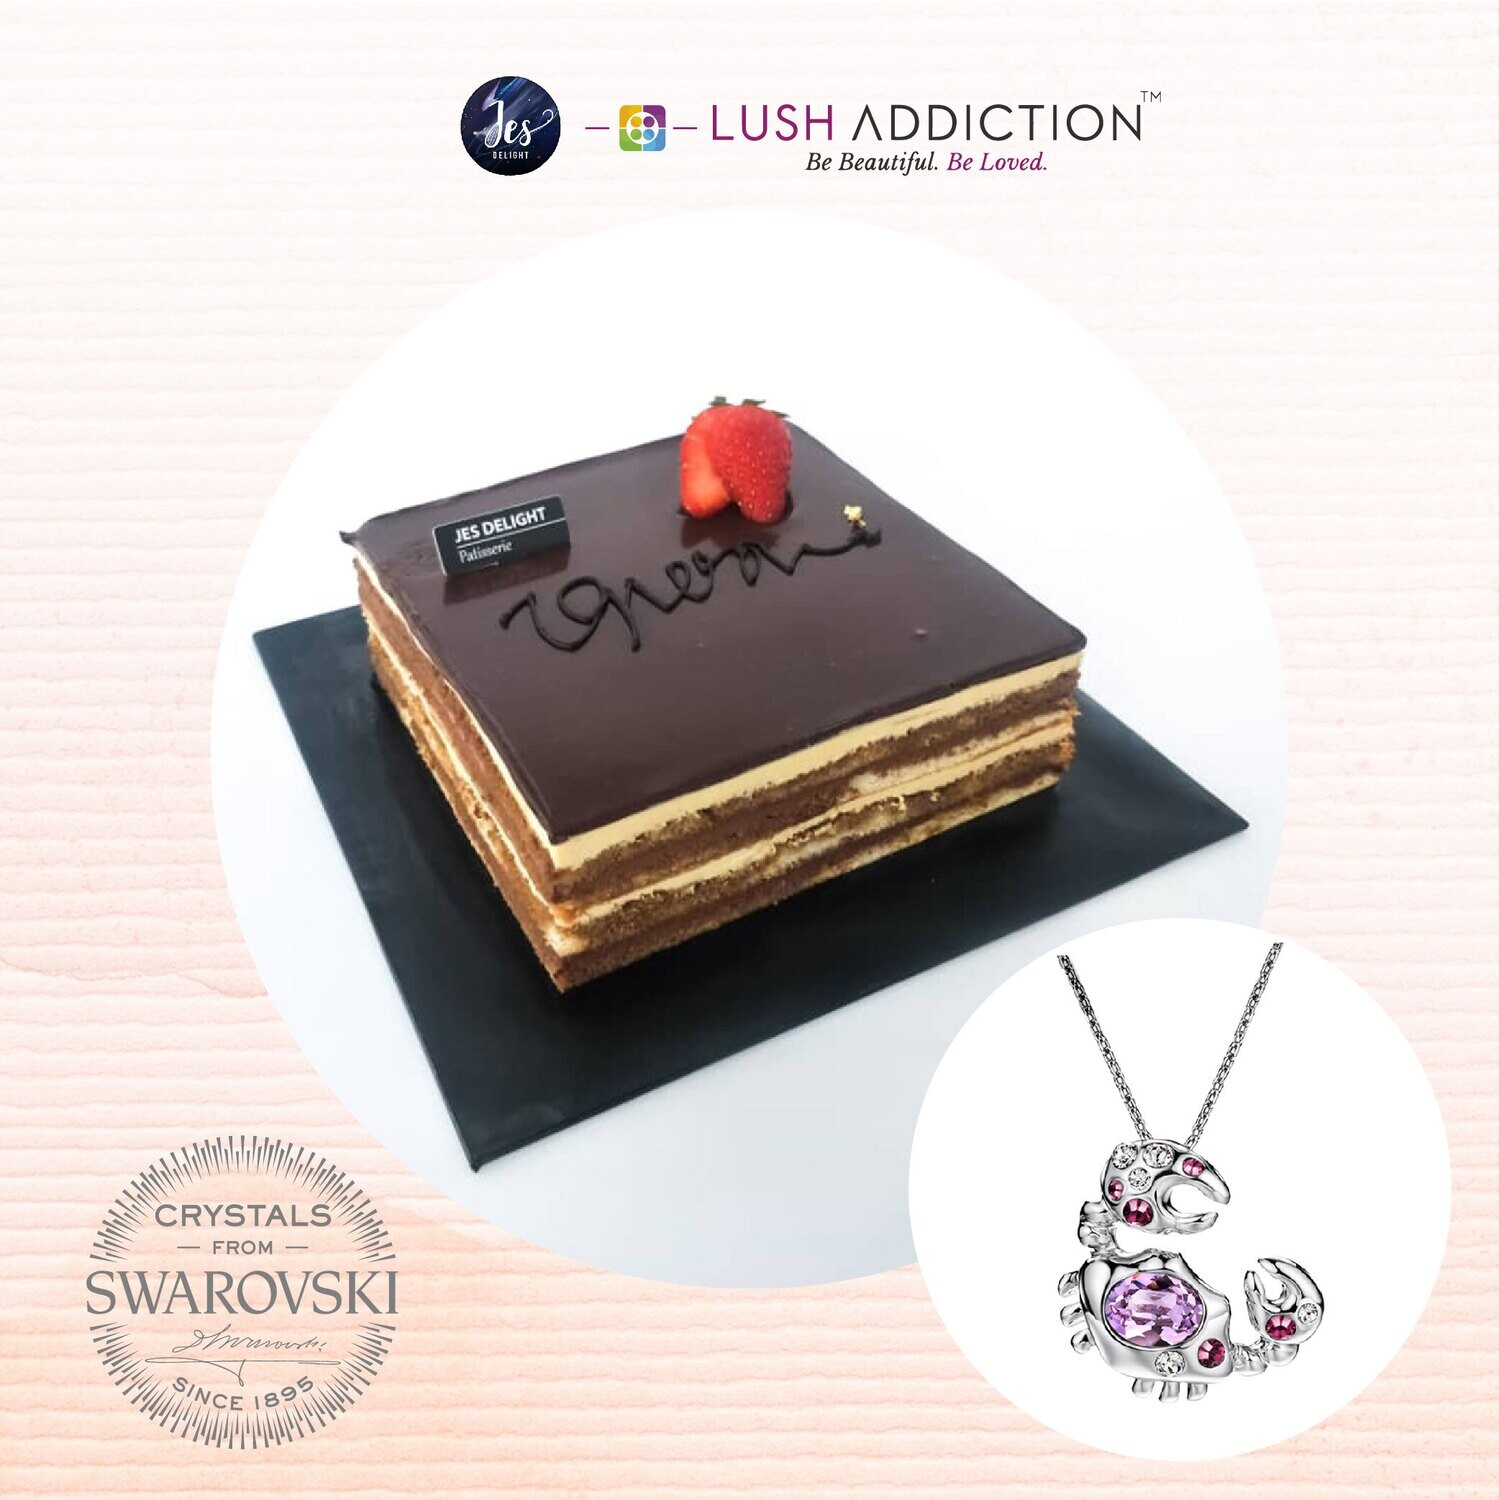 Opera Cake + Lush Cancer Horoscope Necklace Bundle Deal (By: JES Delight from JB)